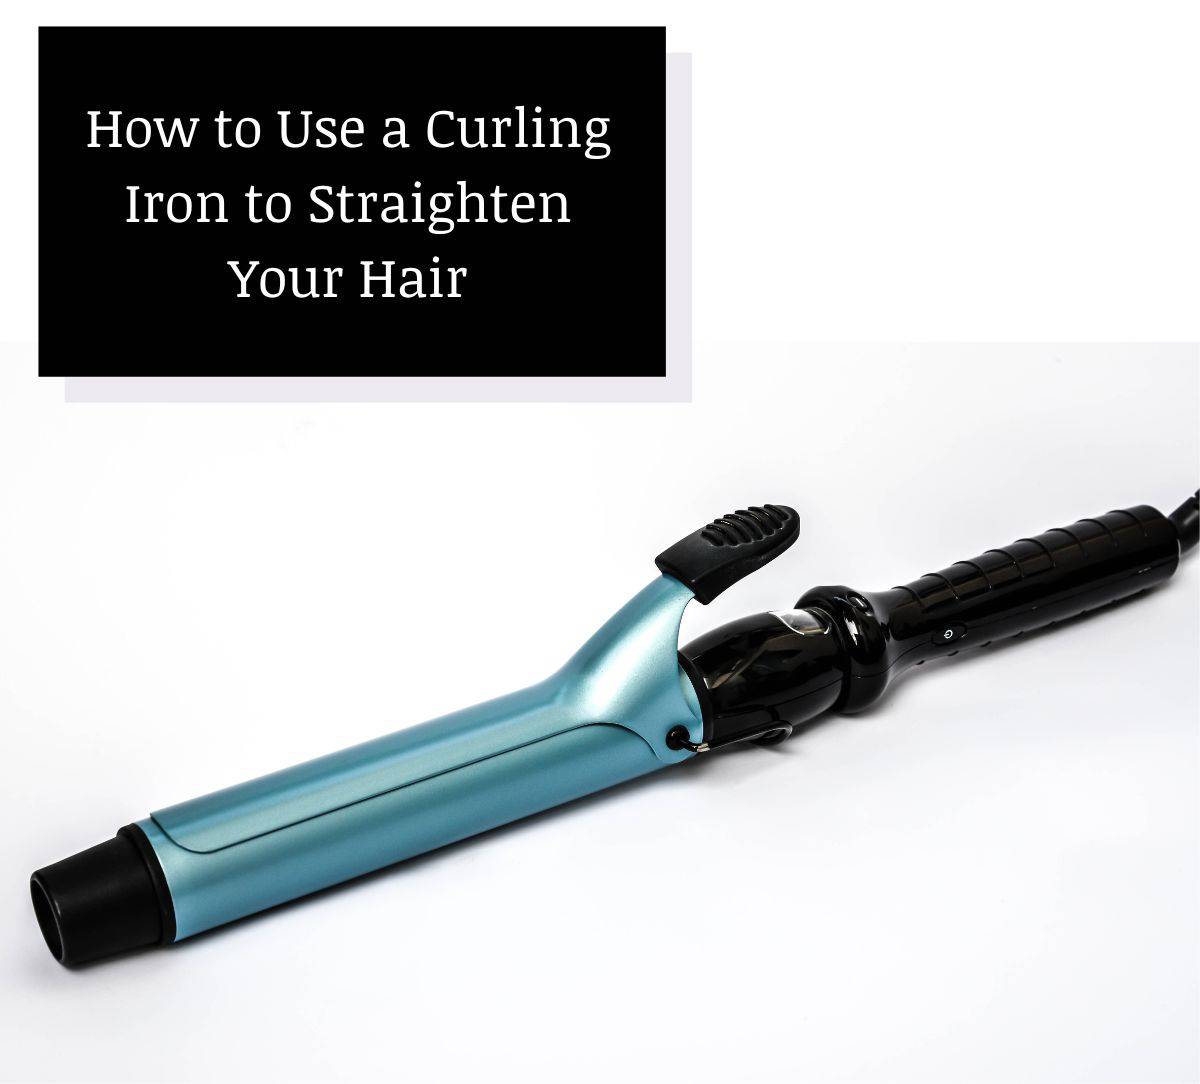 ceramic curling iron below the text 